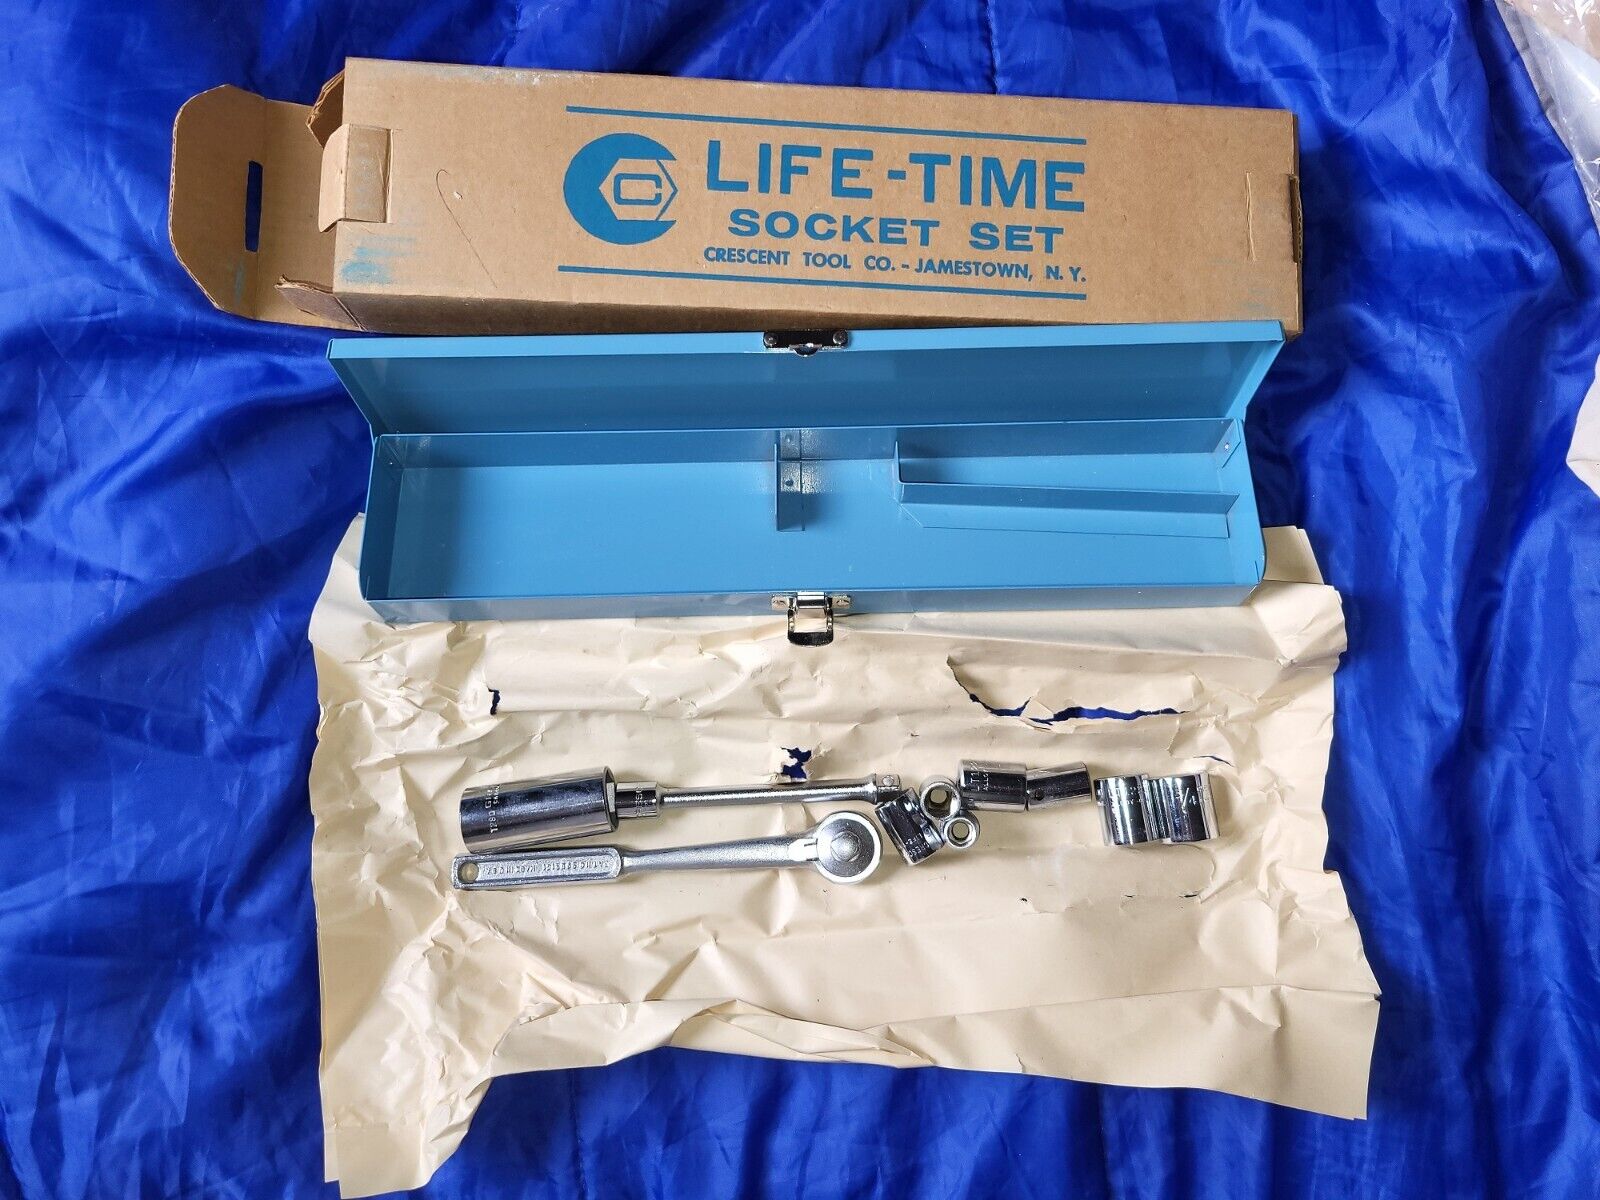 VTG LIFE-TIME SOCKET SET, Crescent Tool Co. Jamestown, NY 1960's, NOS in Box